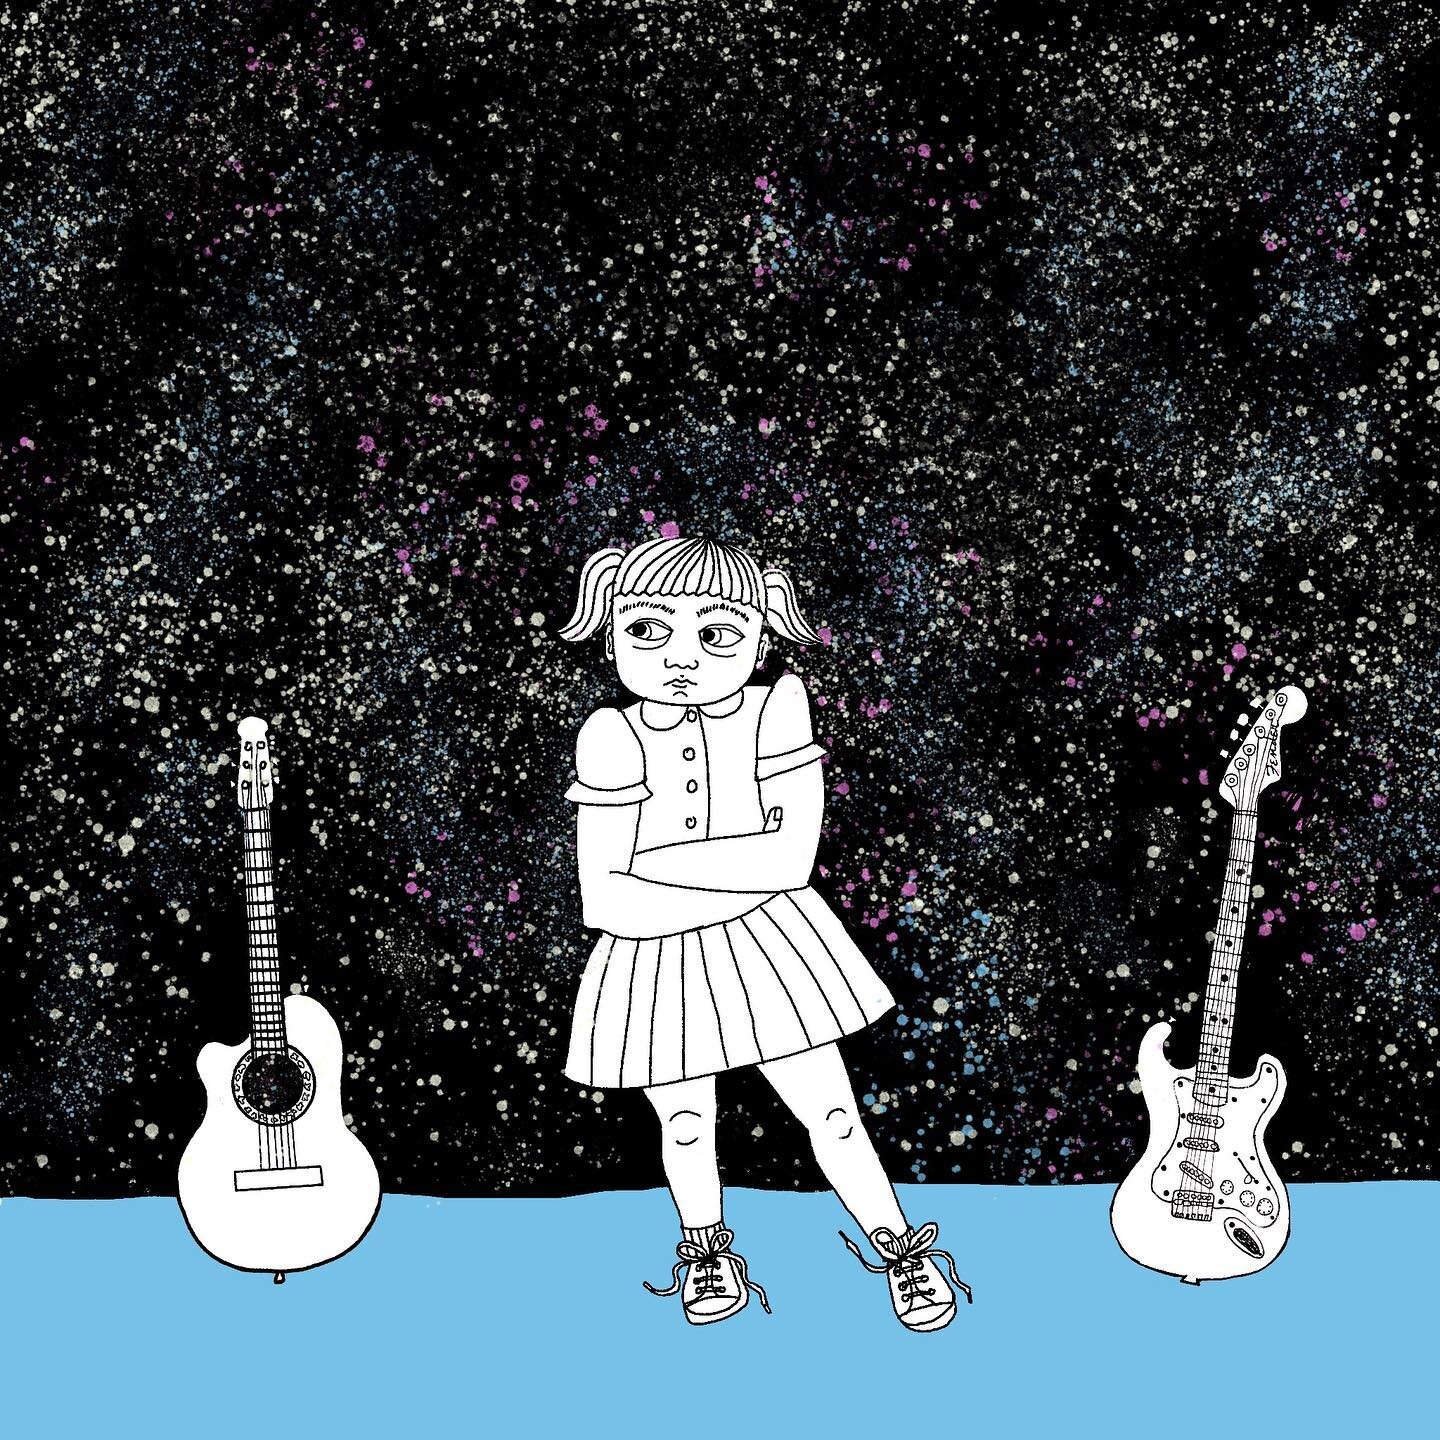 Contemplating my intense &amp; complex relationship to music using digital tools and expressive arts therapy. 

#cosmos #music #innerchild #littlezoe #arttherapy #expressiveartstherapy #guitars #complexity #therapy